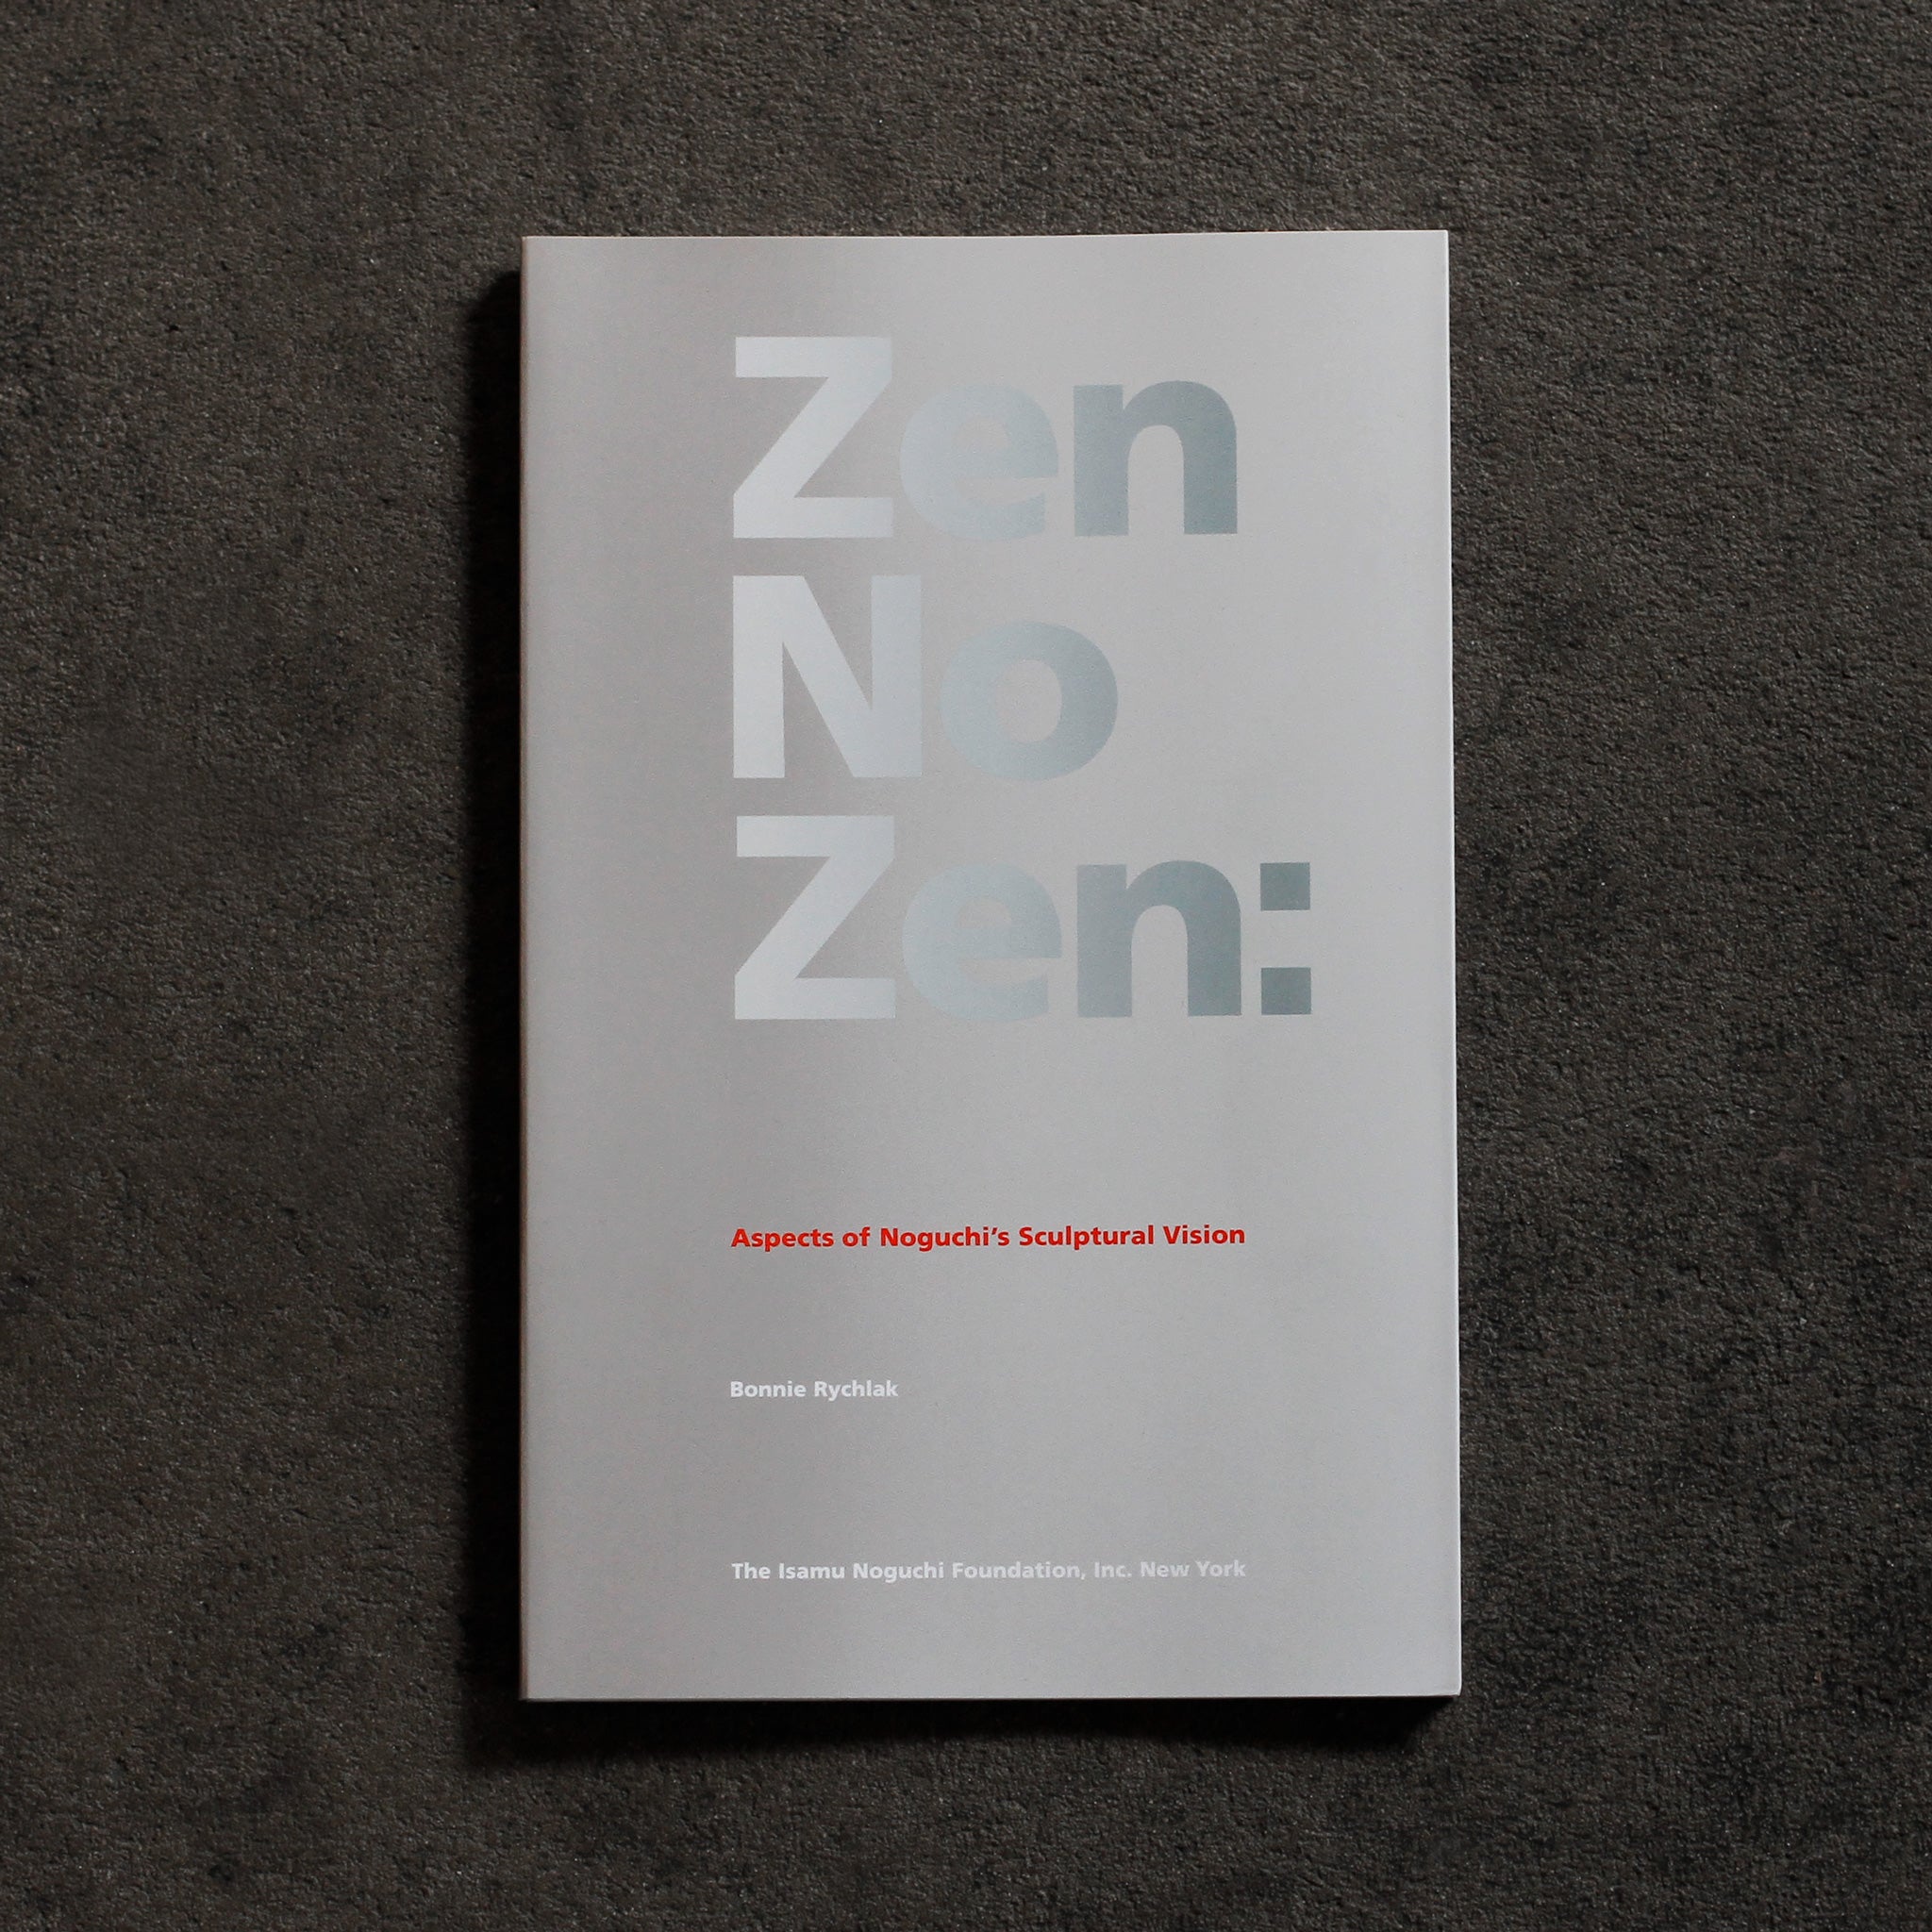 Cover of 'Zen No Zen.' Softcover book with silver grey background and large reflective silver bold sans serif headline text 'Zen No Zen'. In small red sans serif text below, 'Aspects of Noguchi’s Sculptural Vision' and in white text below, same type style, 'Bonnie Rychlak,' 'The Isamu Noguchi Foundation Inc. New York'